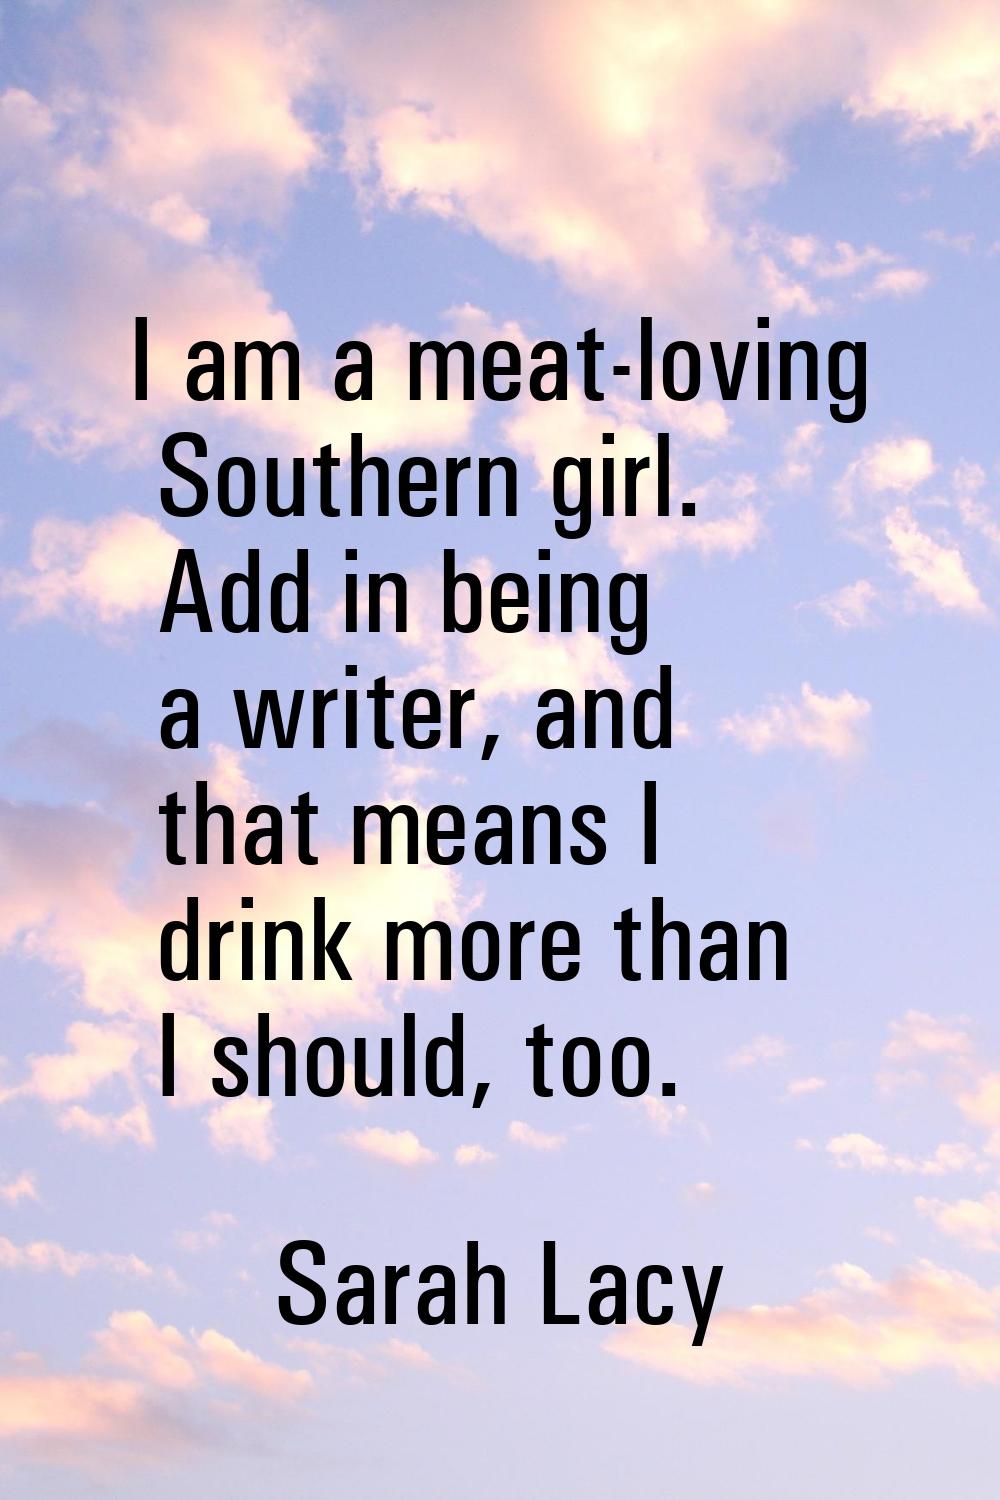 I am a meat-loving Southern girl. Add in being a writer, and that means I drink more than I should,